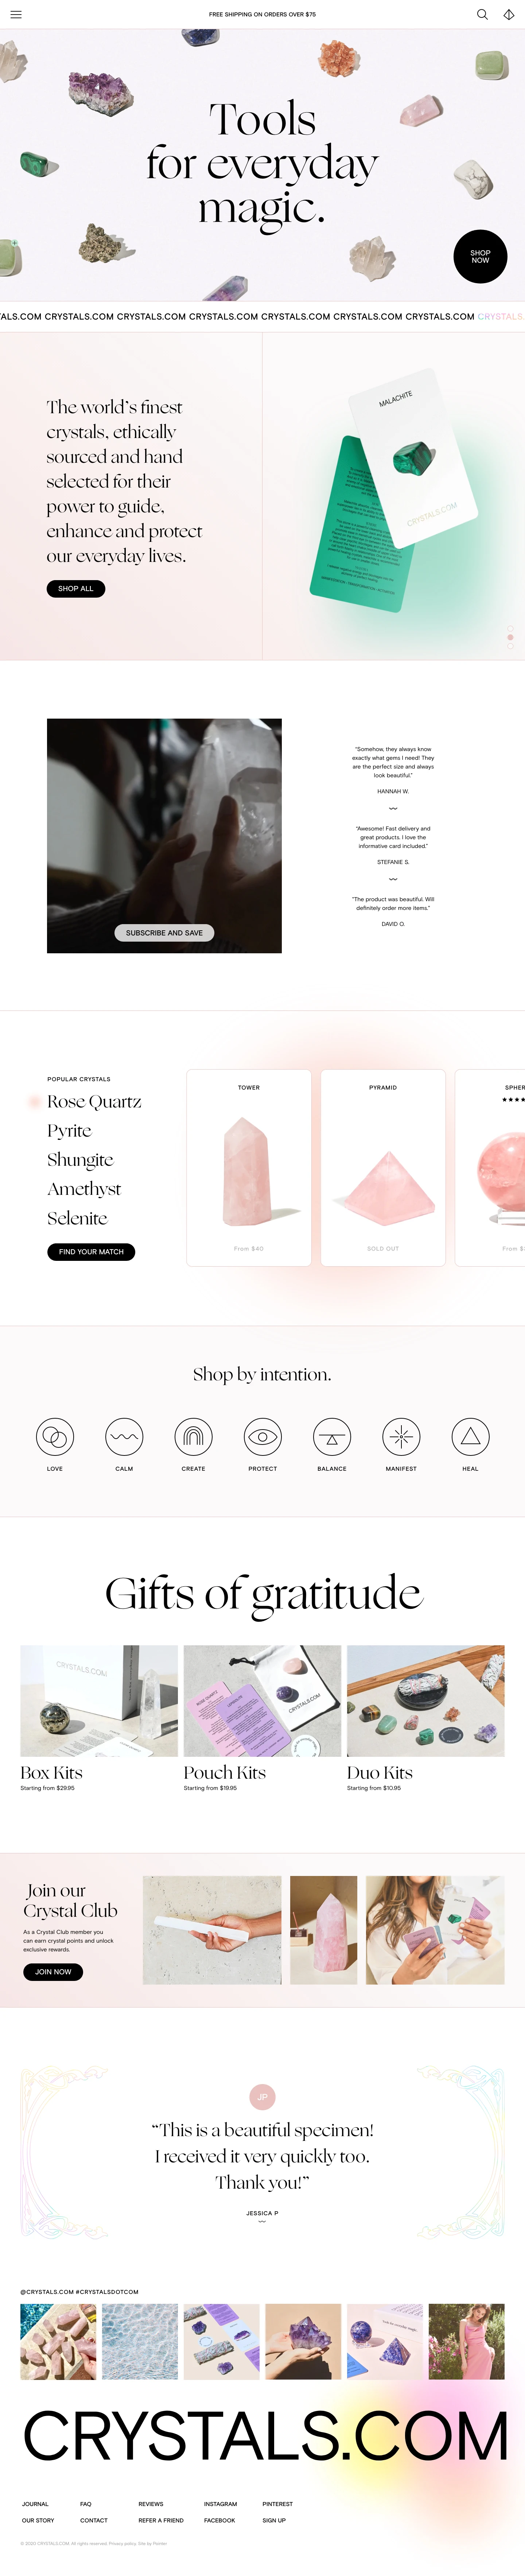 Crystals Landing Page Example: The world’s finest crystals, ethically sourced and hand selected for their power to guide, enhance and protect our everyday lives.